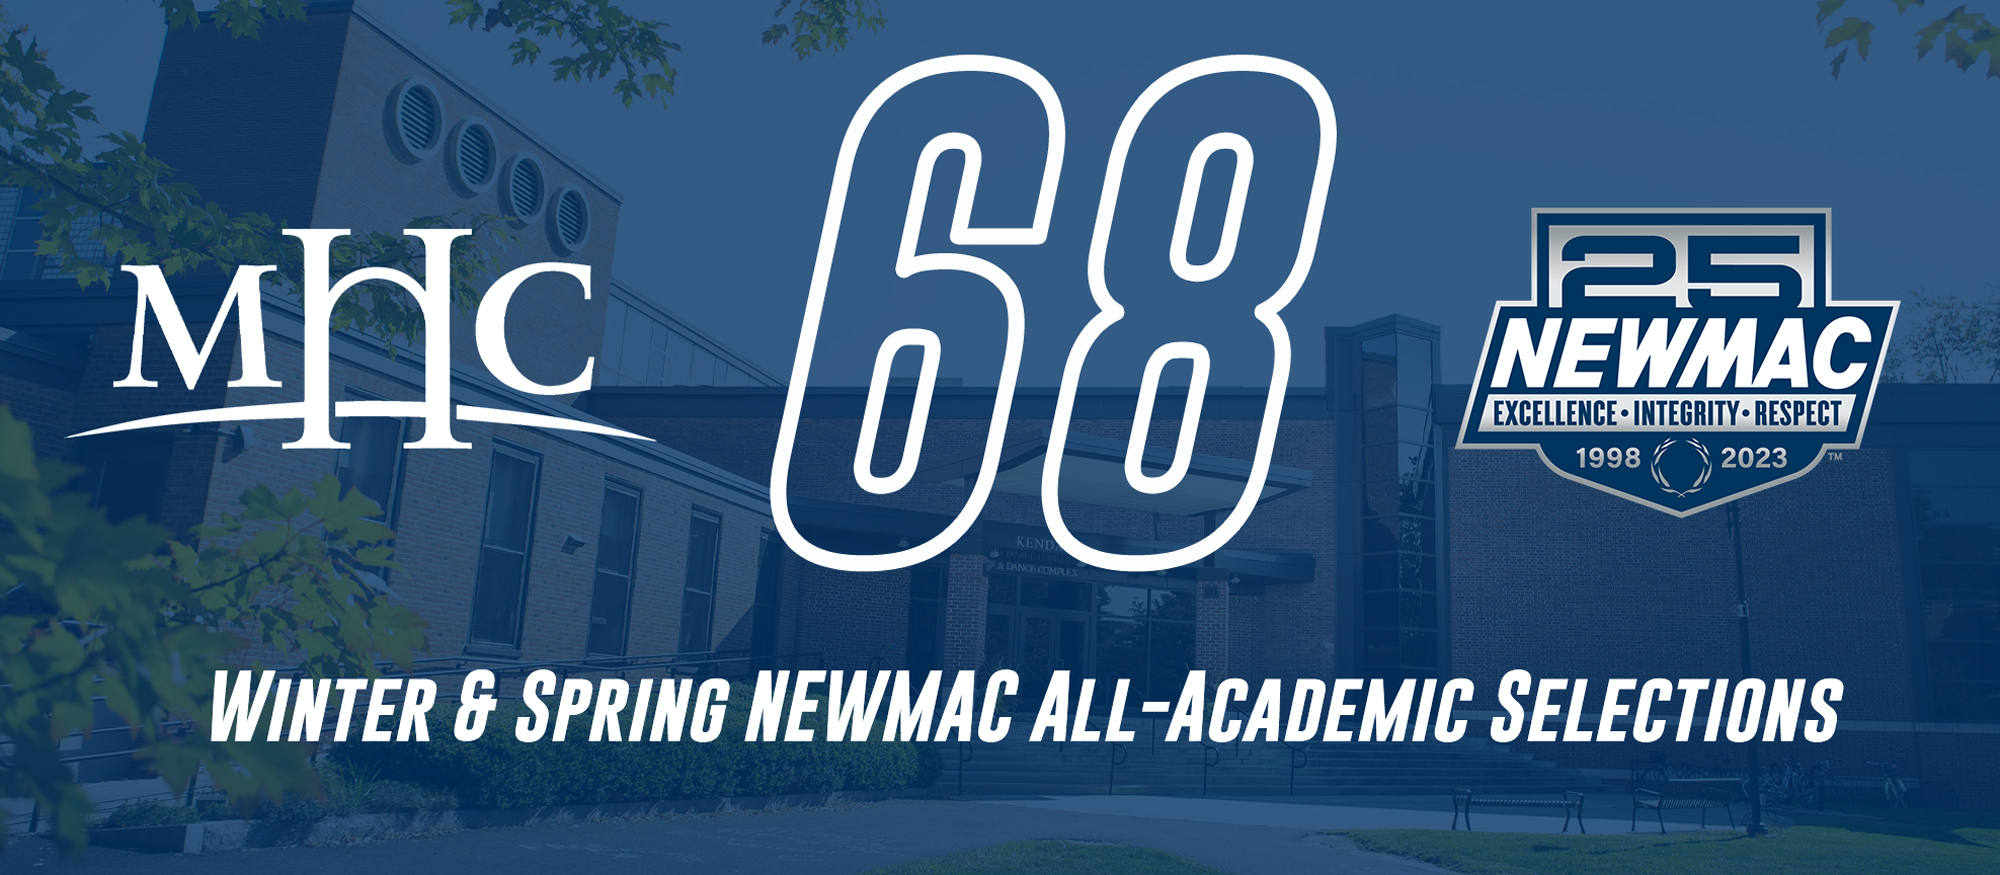 Lyon student-athletes earn 68 winter and spring NEWMAC All-Academic honors